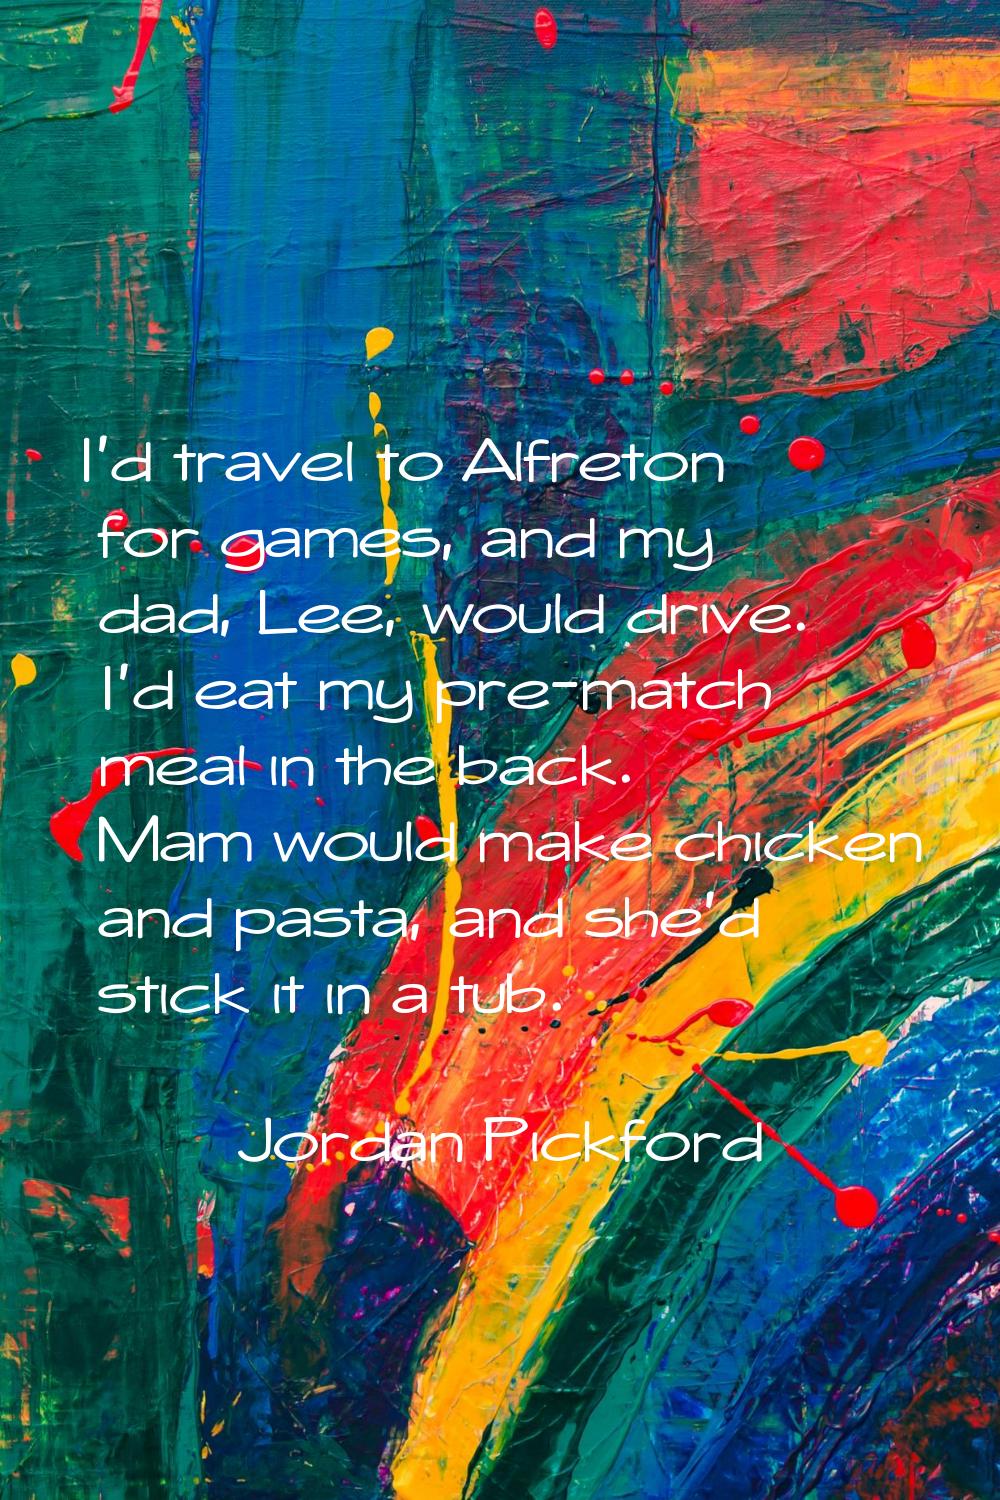 I'd travel to Alfreton for games, and my dad, Lee, would drive. I'd eat my pre-match meal in the ba